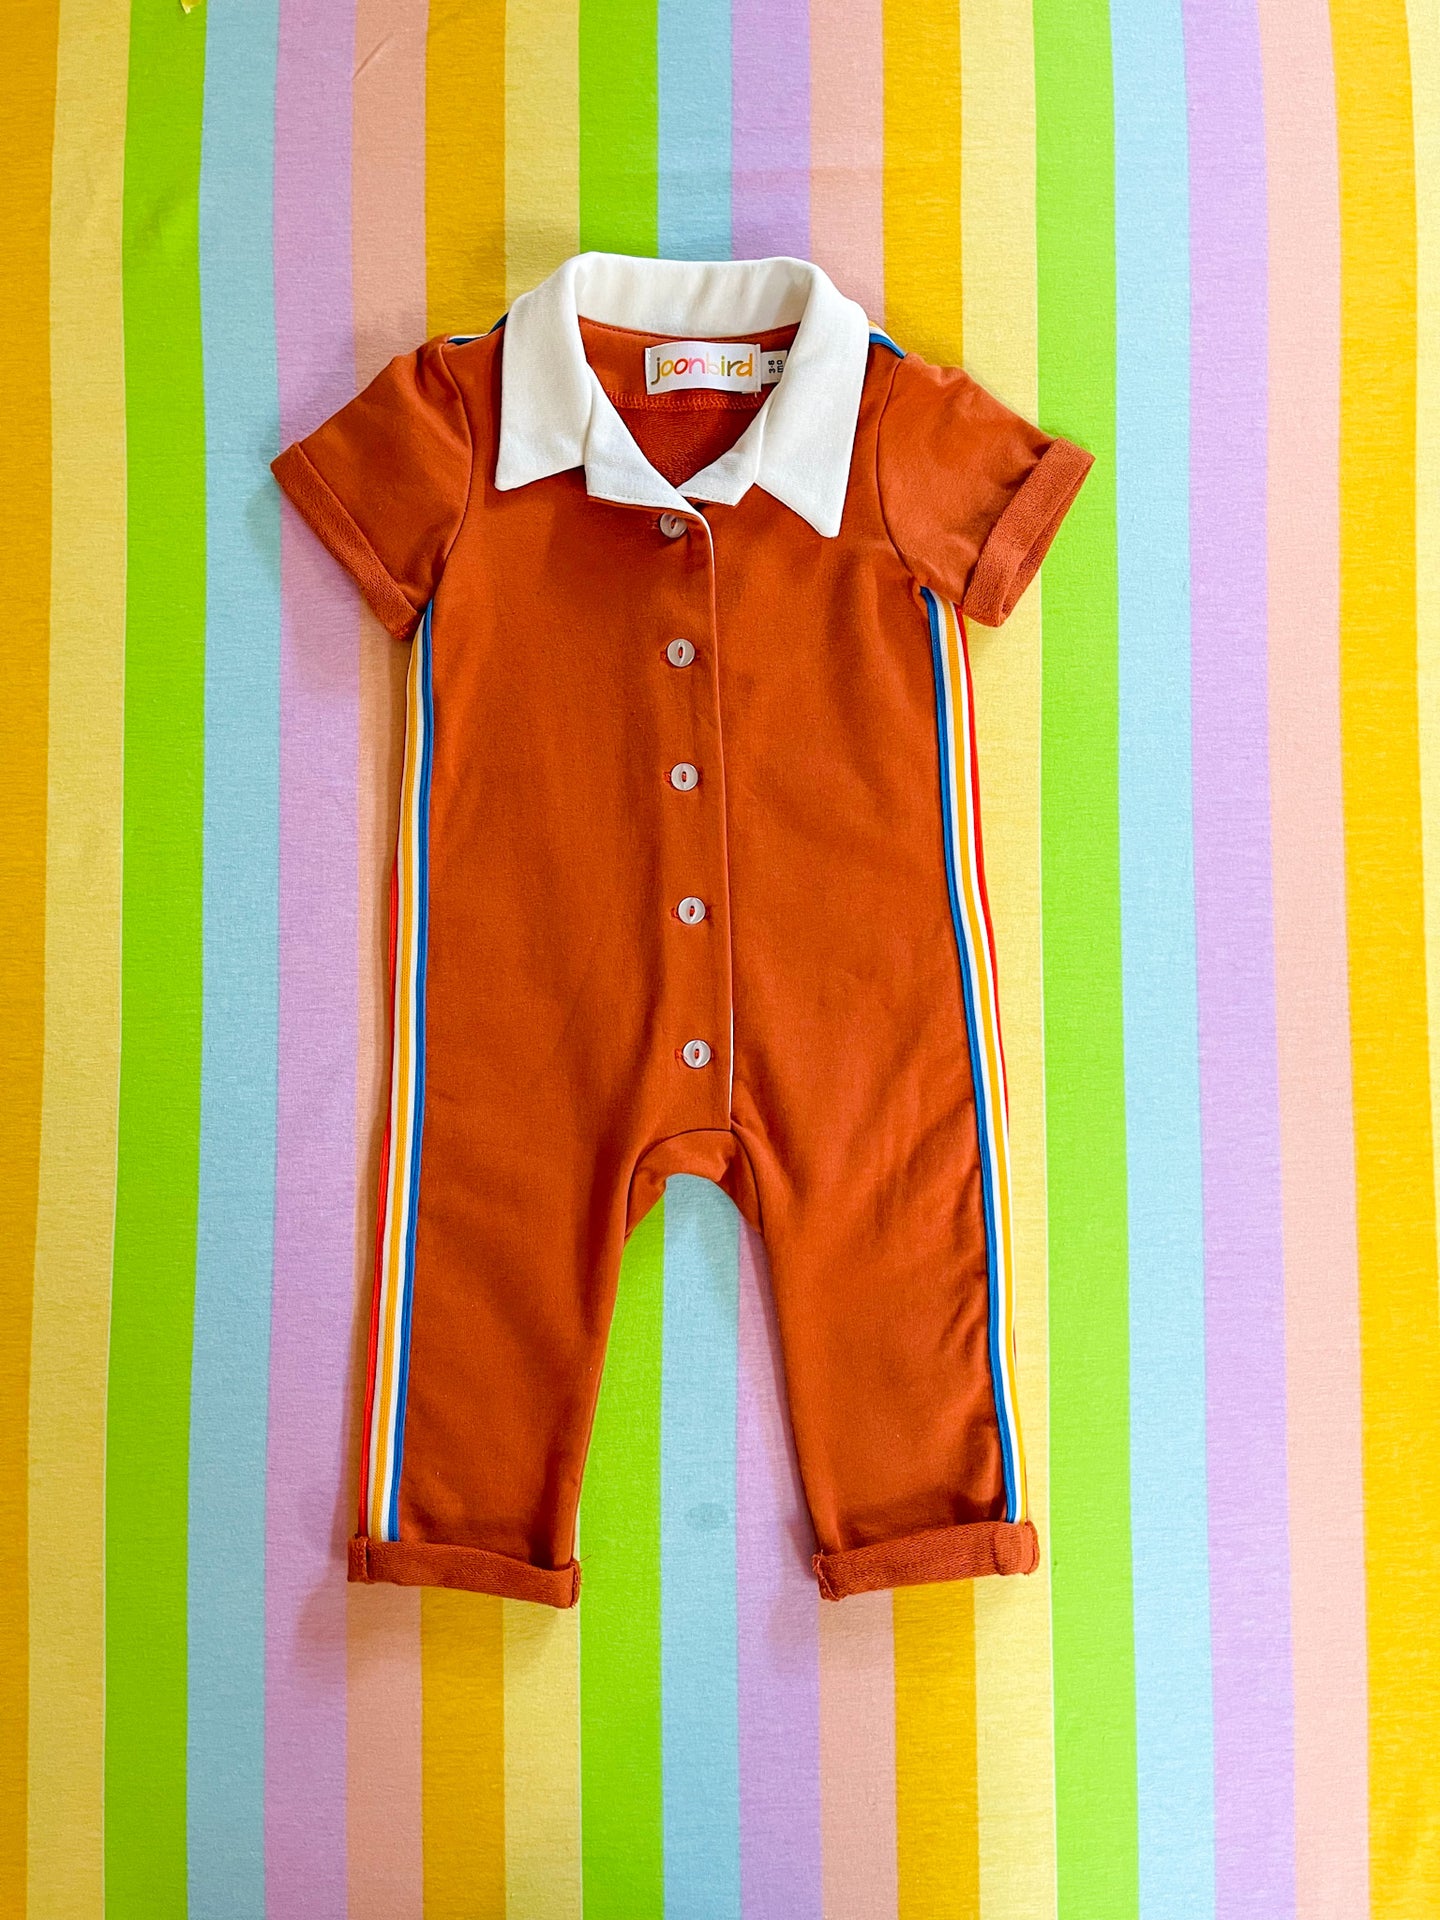 cute funky boys vintage inspired utility jumpsuit for groovy birthday outfit